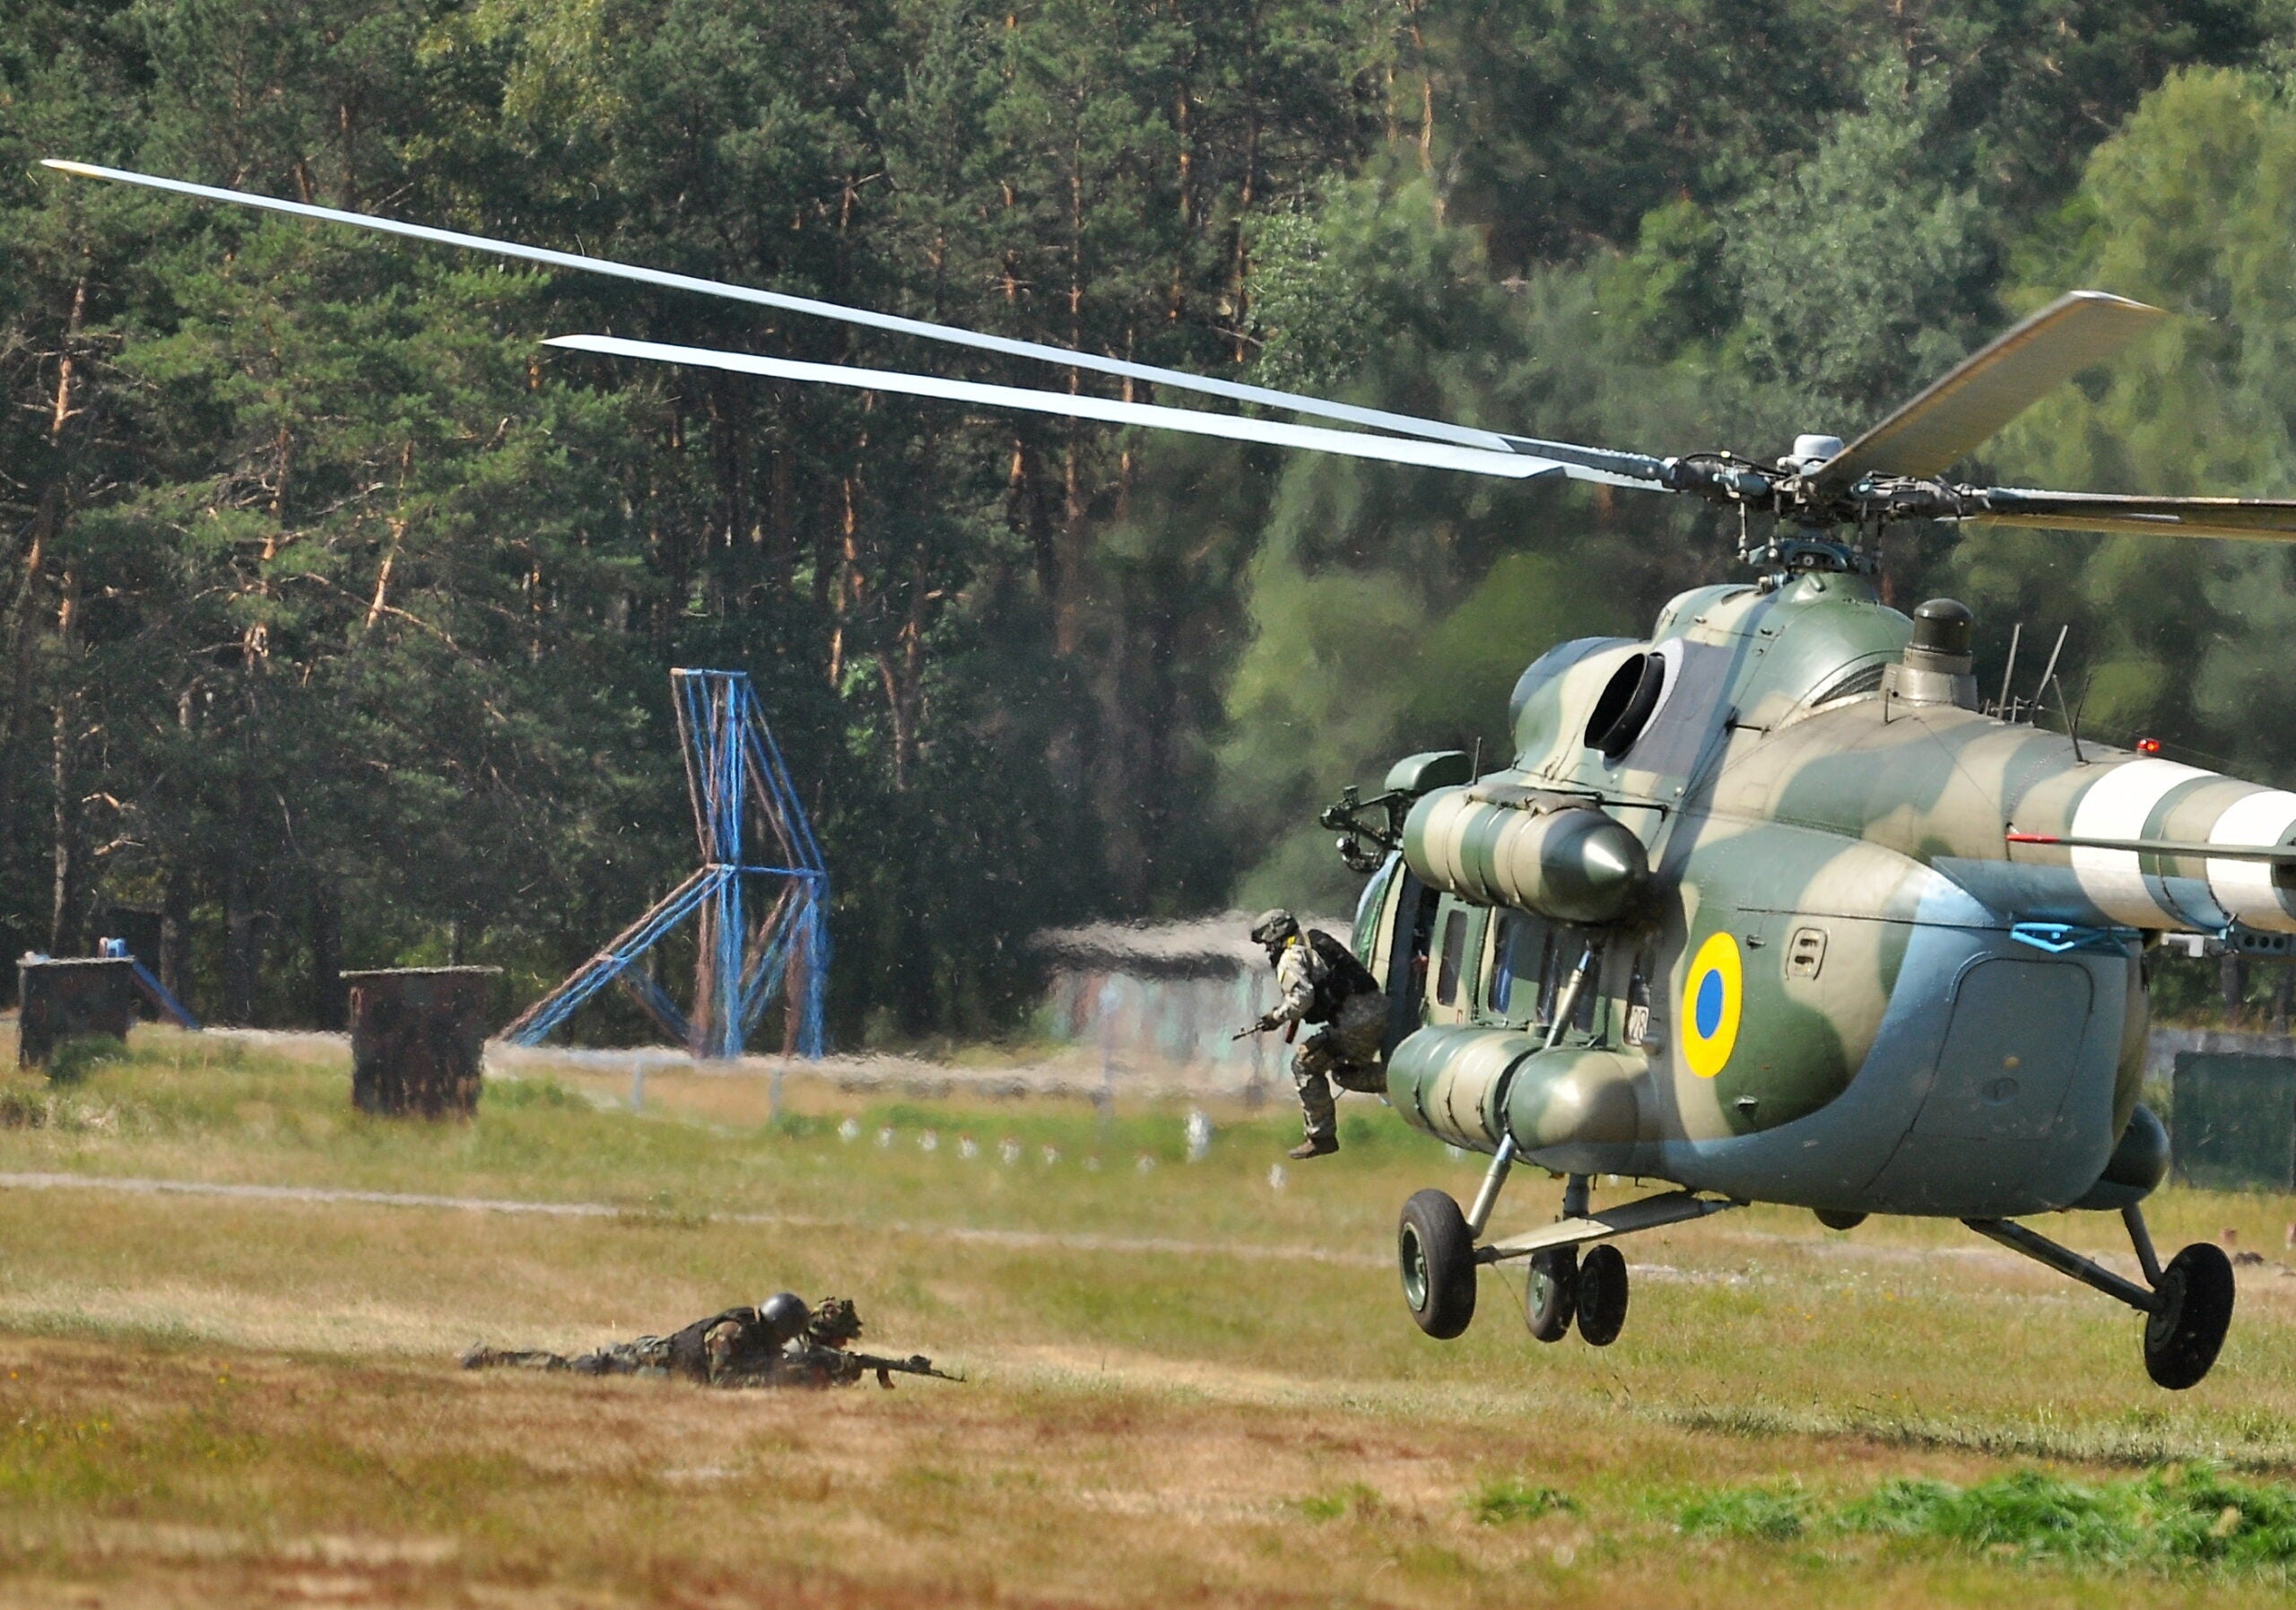 Ukrainian soldiers during the disembarkation from helicopter Mi-8, demonstrate their skills, before being sent to the east to fight against the pro-Russian separatists, in the military base in the village of Novi Petrivtsi near Kiev. Ukraine, Wednesday, July 22, 2015. (Photo by Danil Shamkin/NurPhoto) (Photo by NurPhoto/NurPhoto via Getty Images)